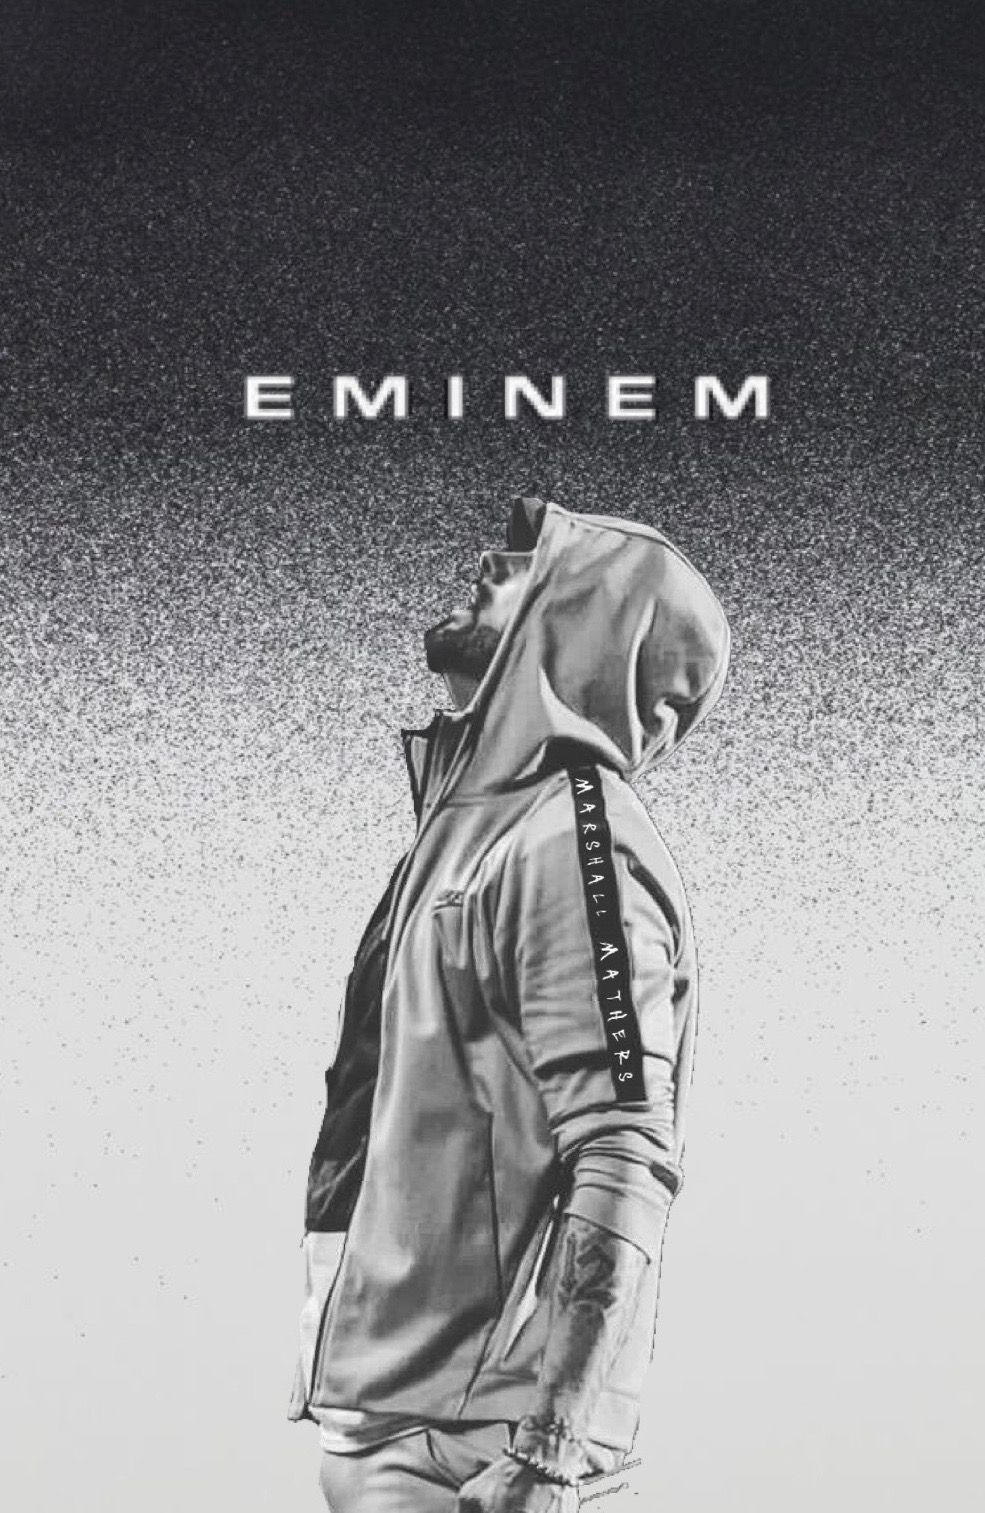 Eminem wallpaper eminem wallpapers eminem eminem poster